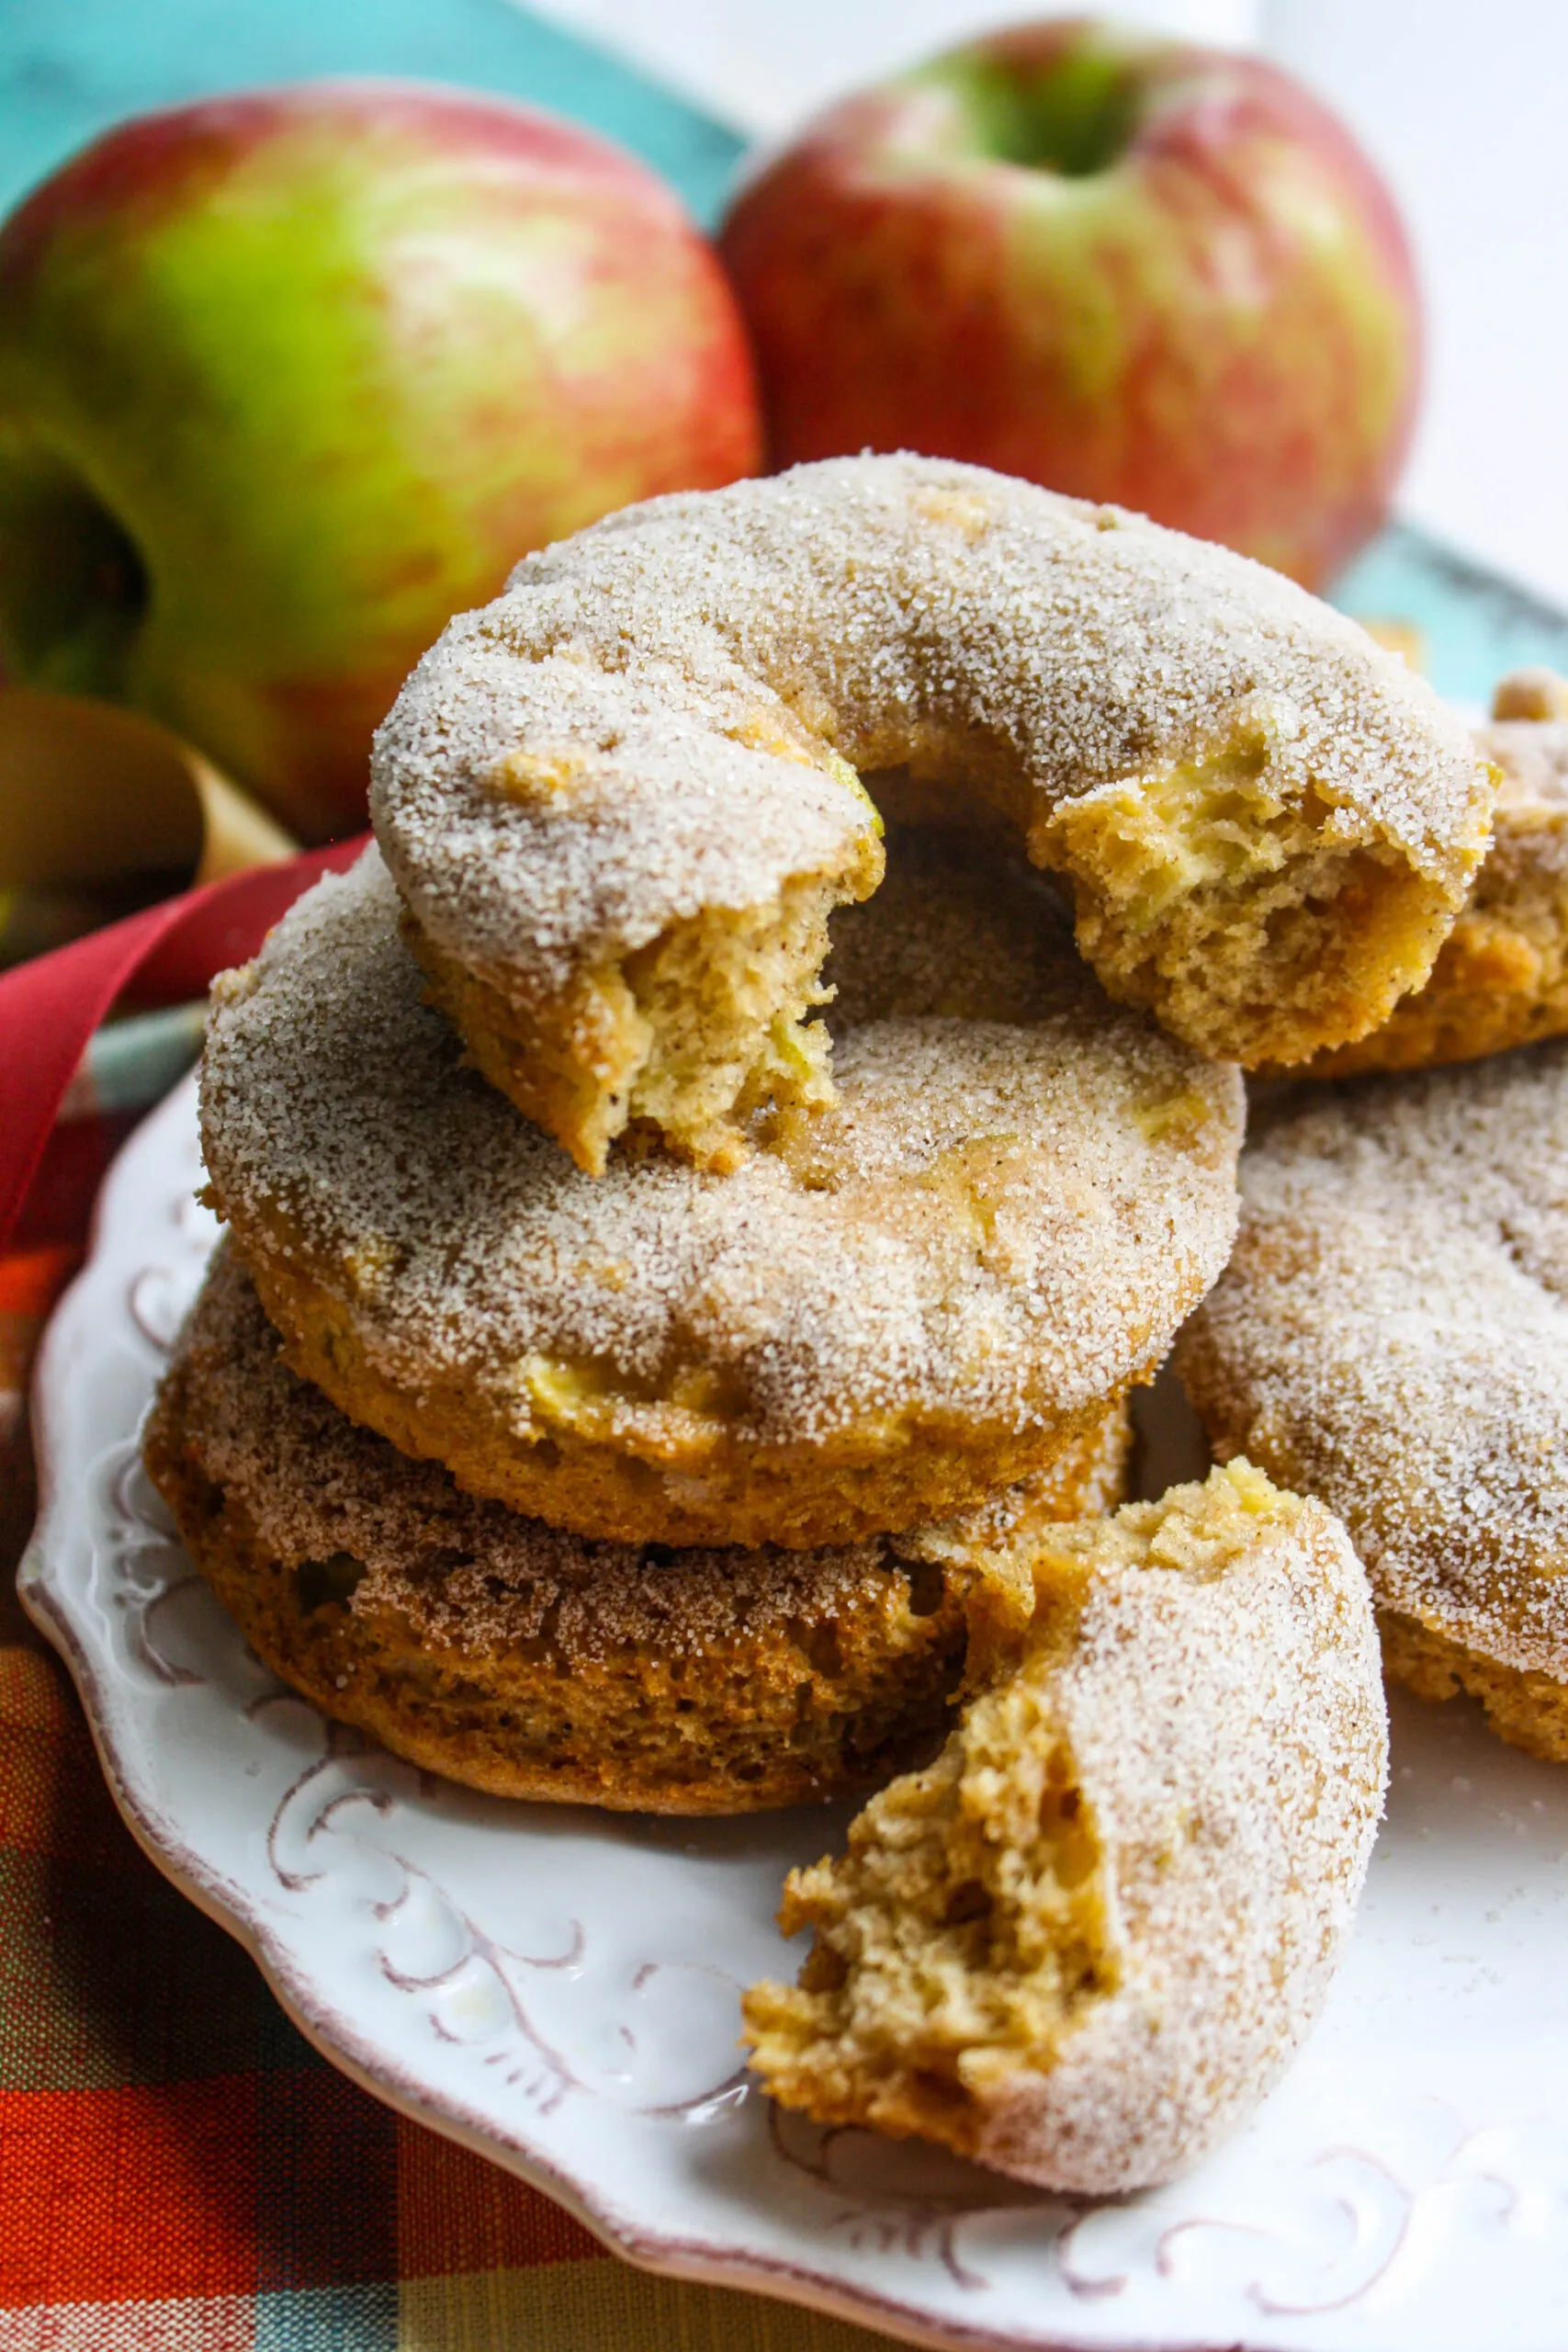 Dig into these Baked Apple Cider Donuts this season for a fun and flavorful treat!